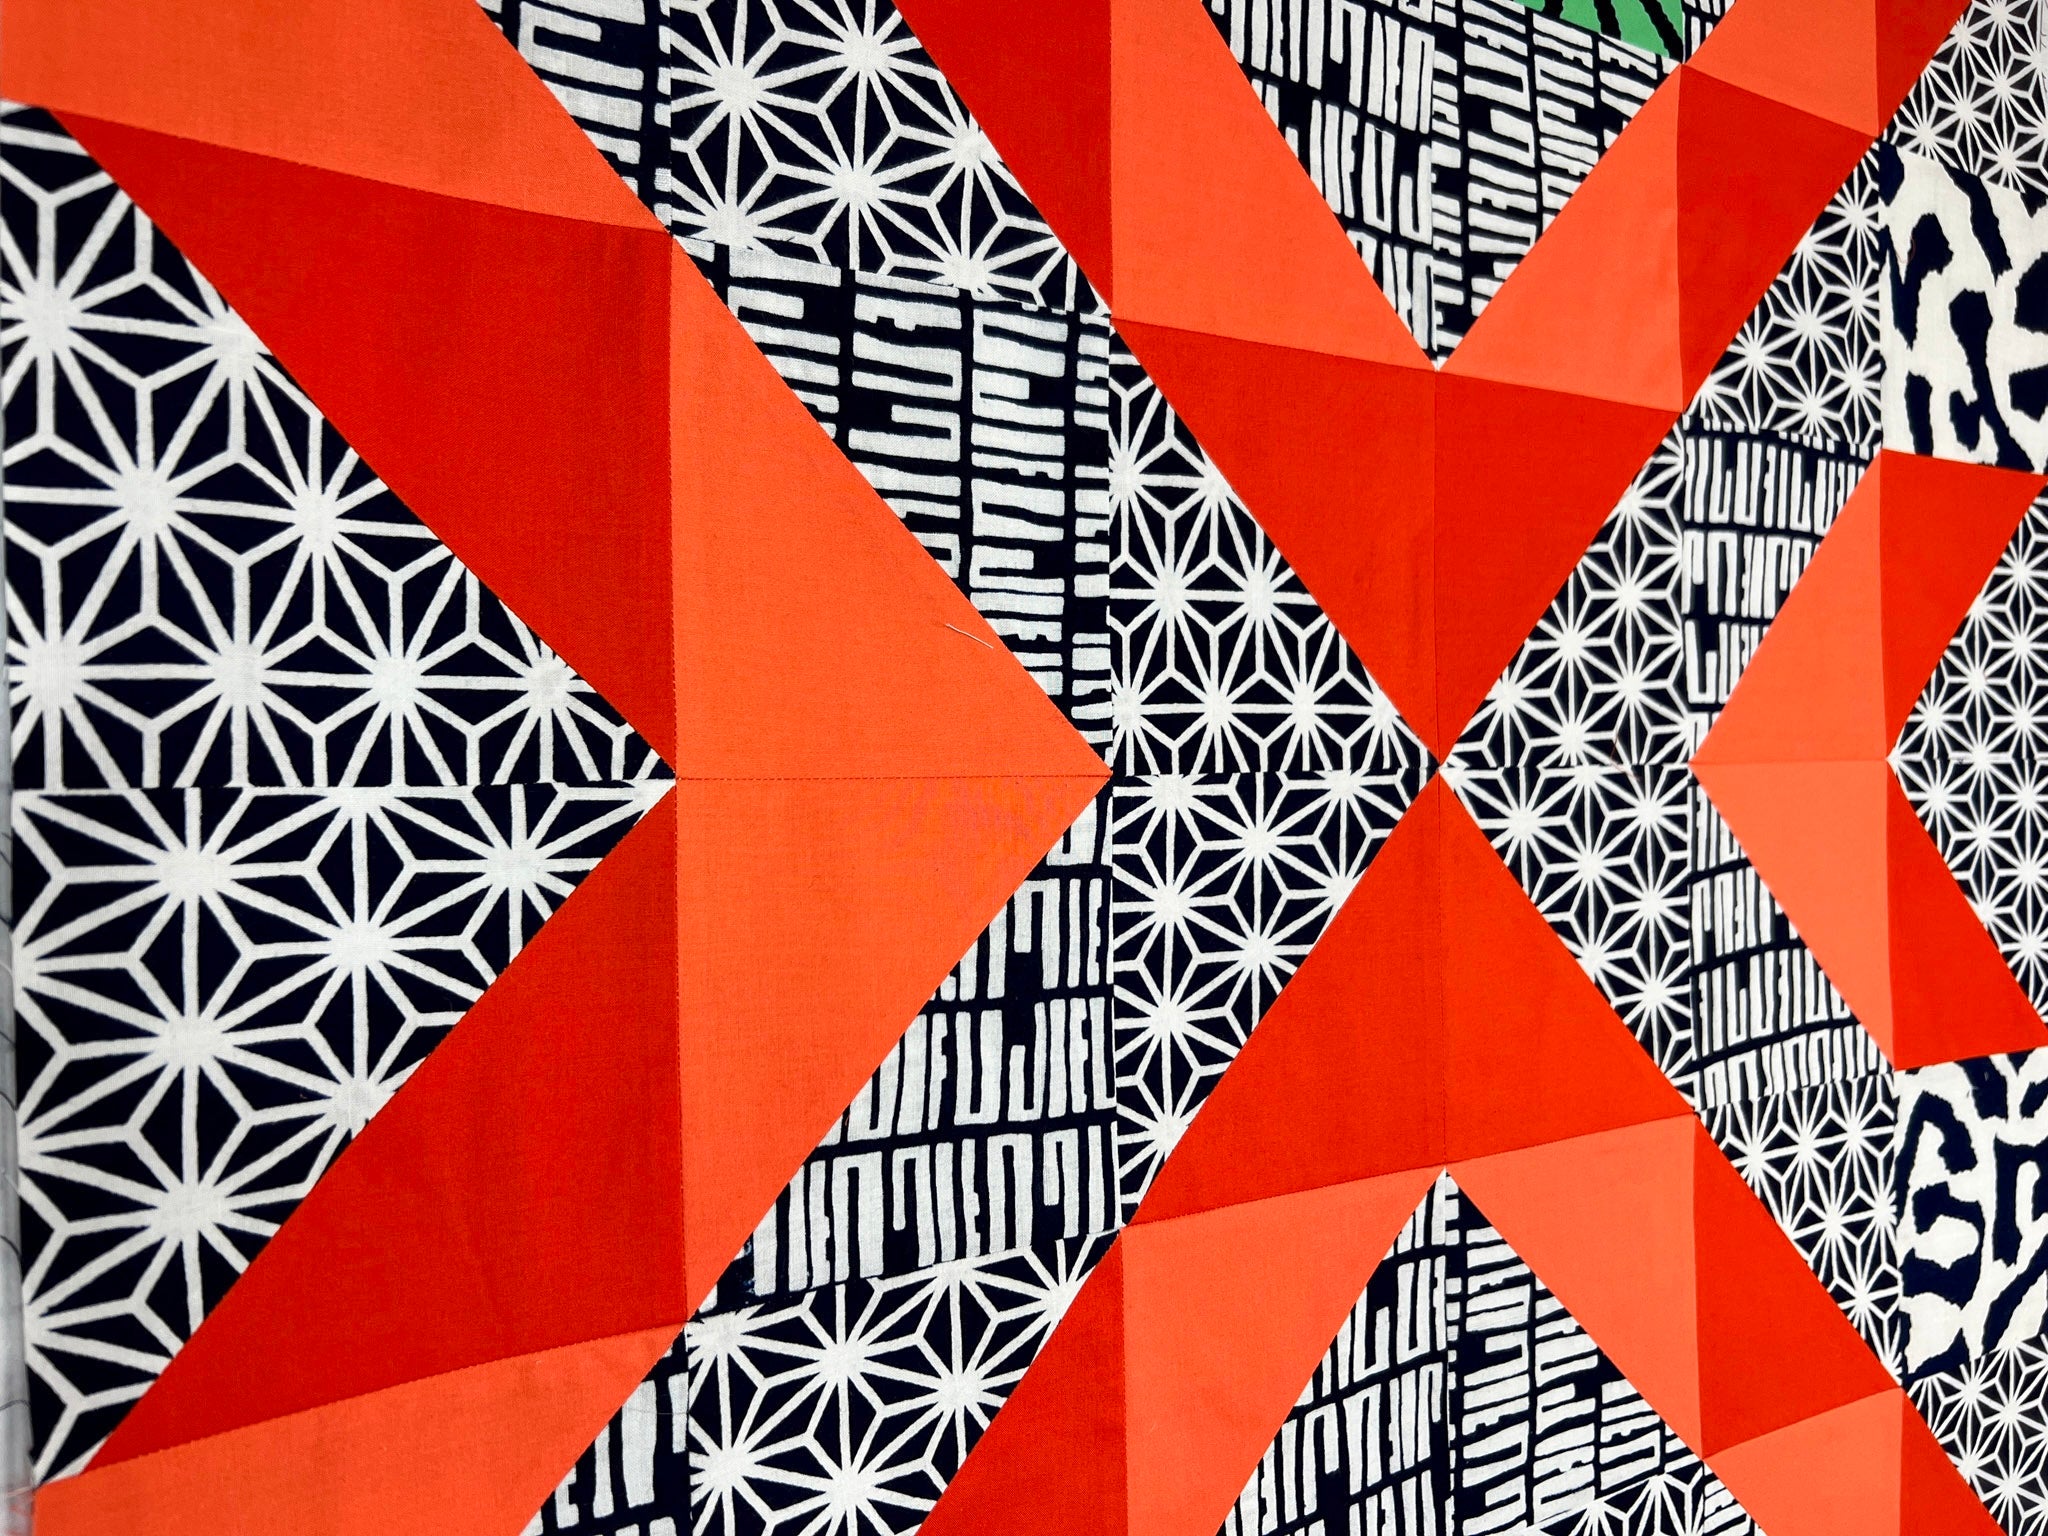 Process, Zag Medallion Quilt by Patricia Belyea